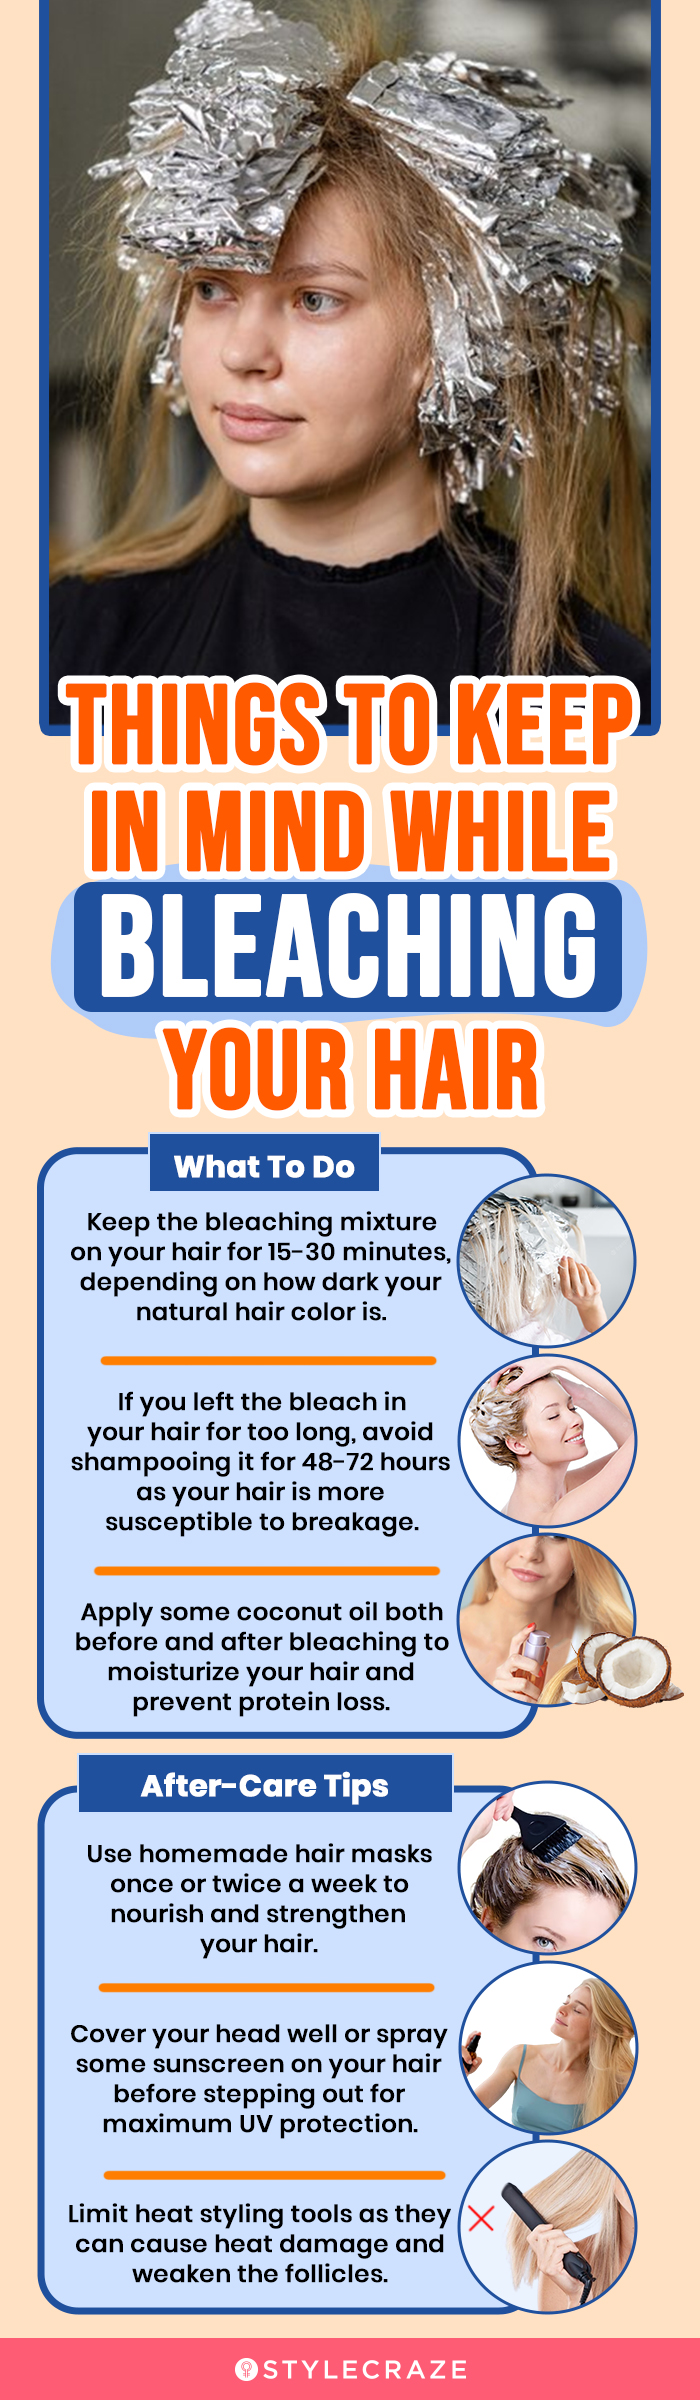 things to keep in mind while bleaching your hair (infographic)